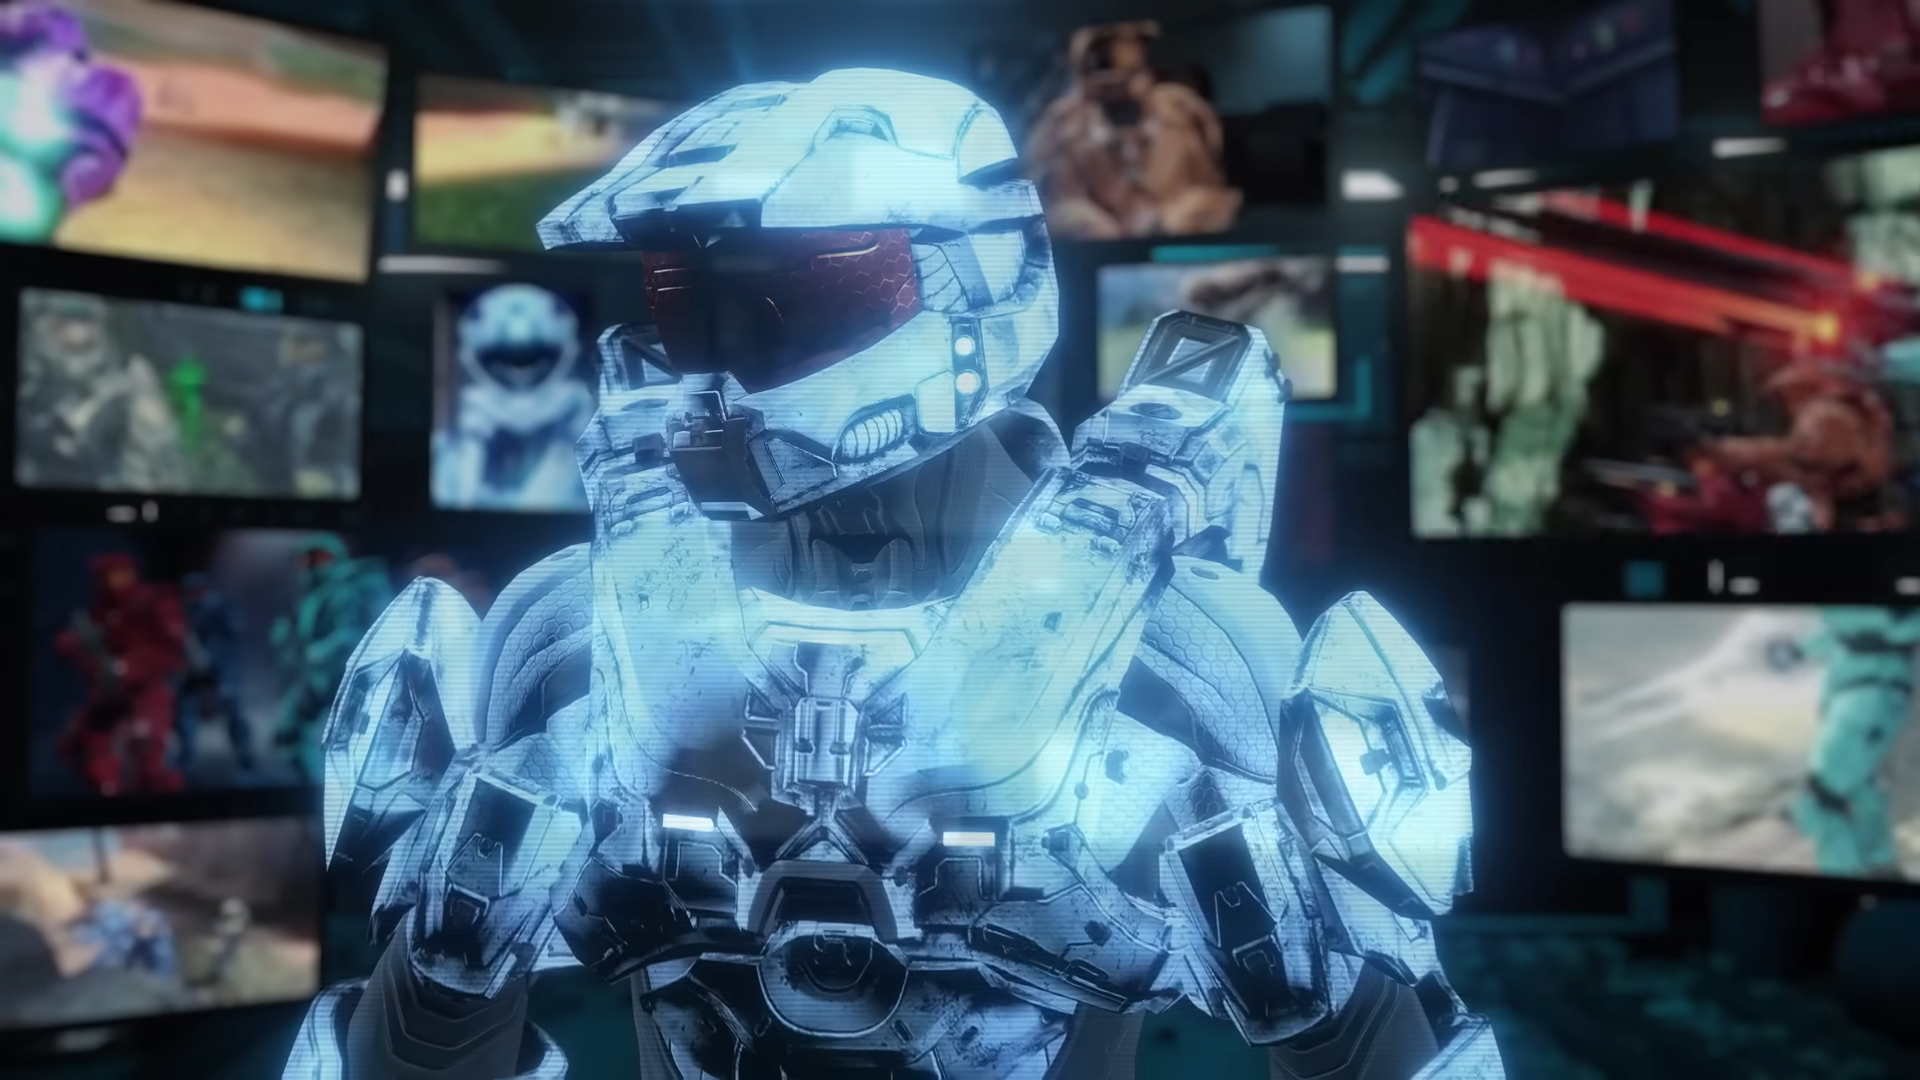 The "Restoration" edition of Red vs Blue in the Final Season